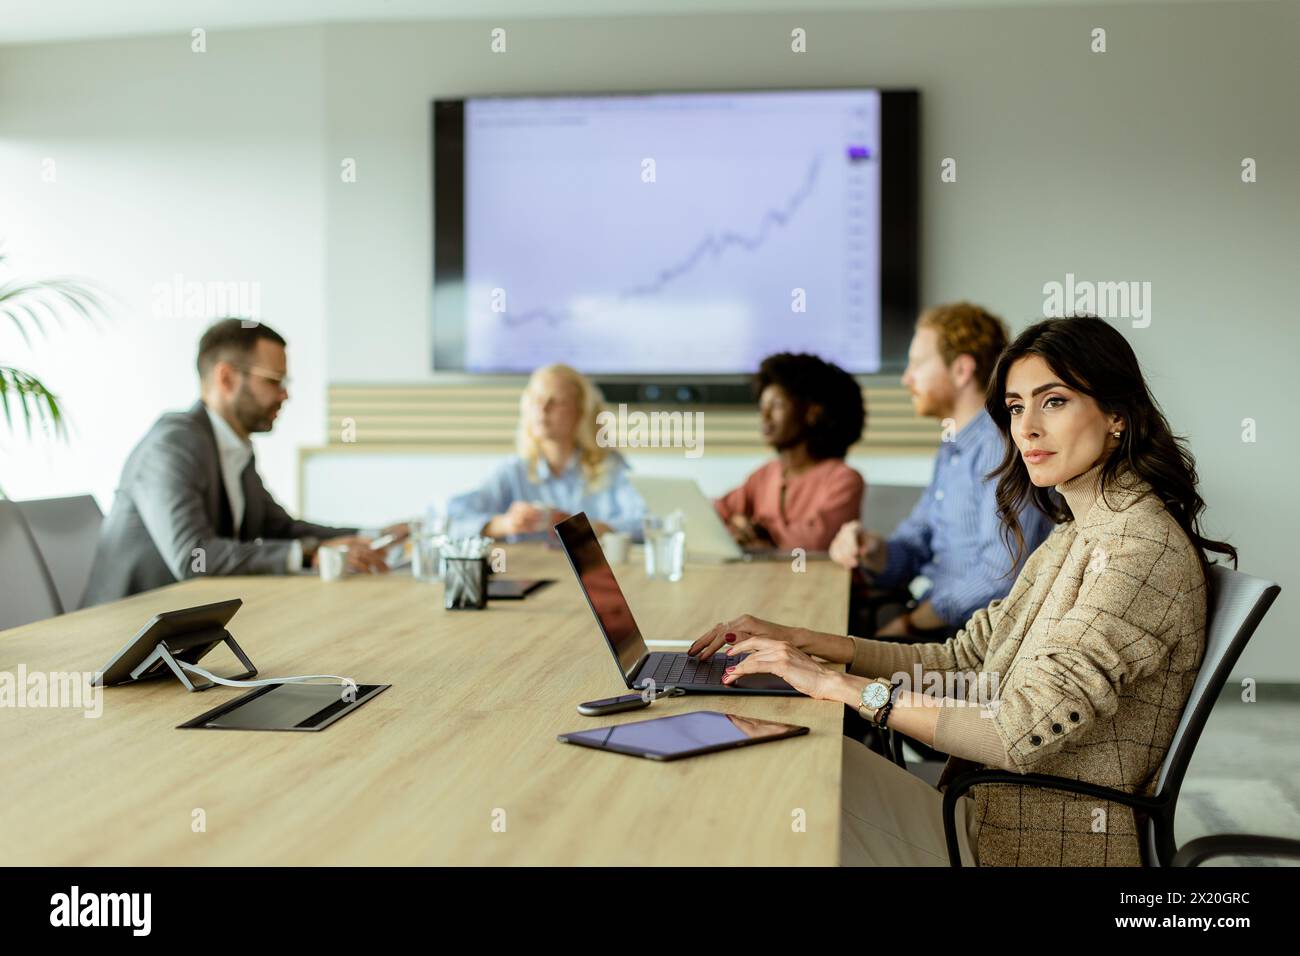 A professional team analyzes growth trends in a modern conference room with a digital display. Stock Photo